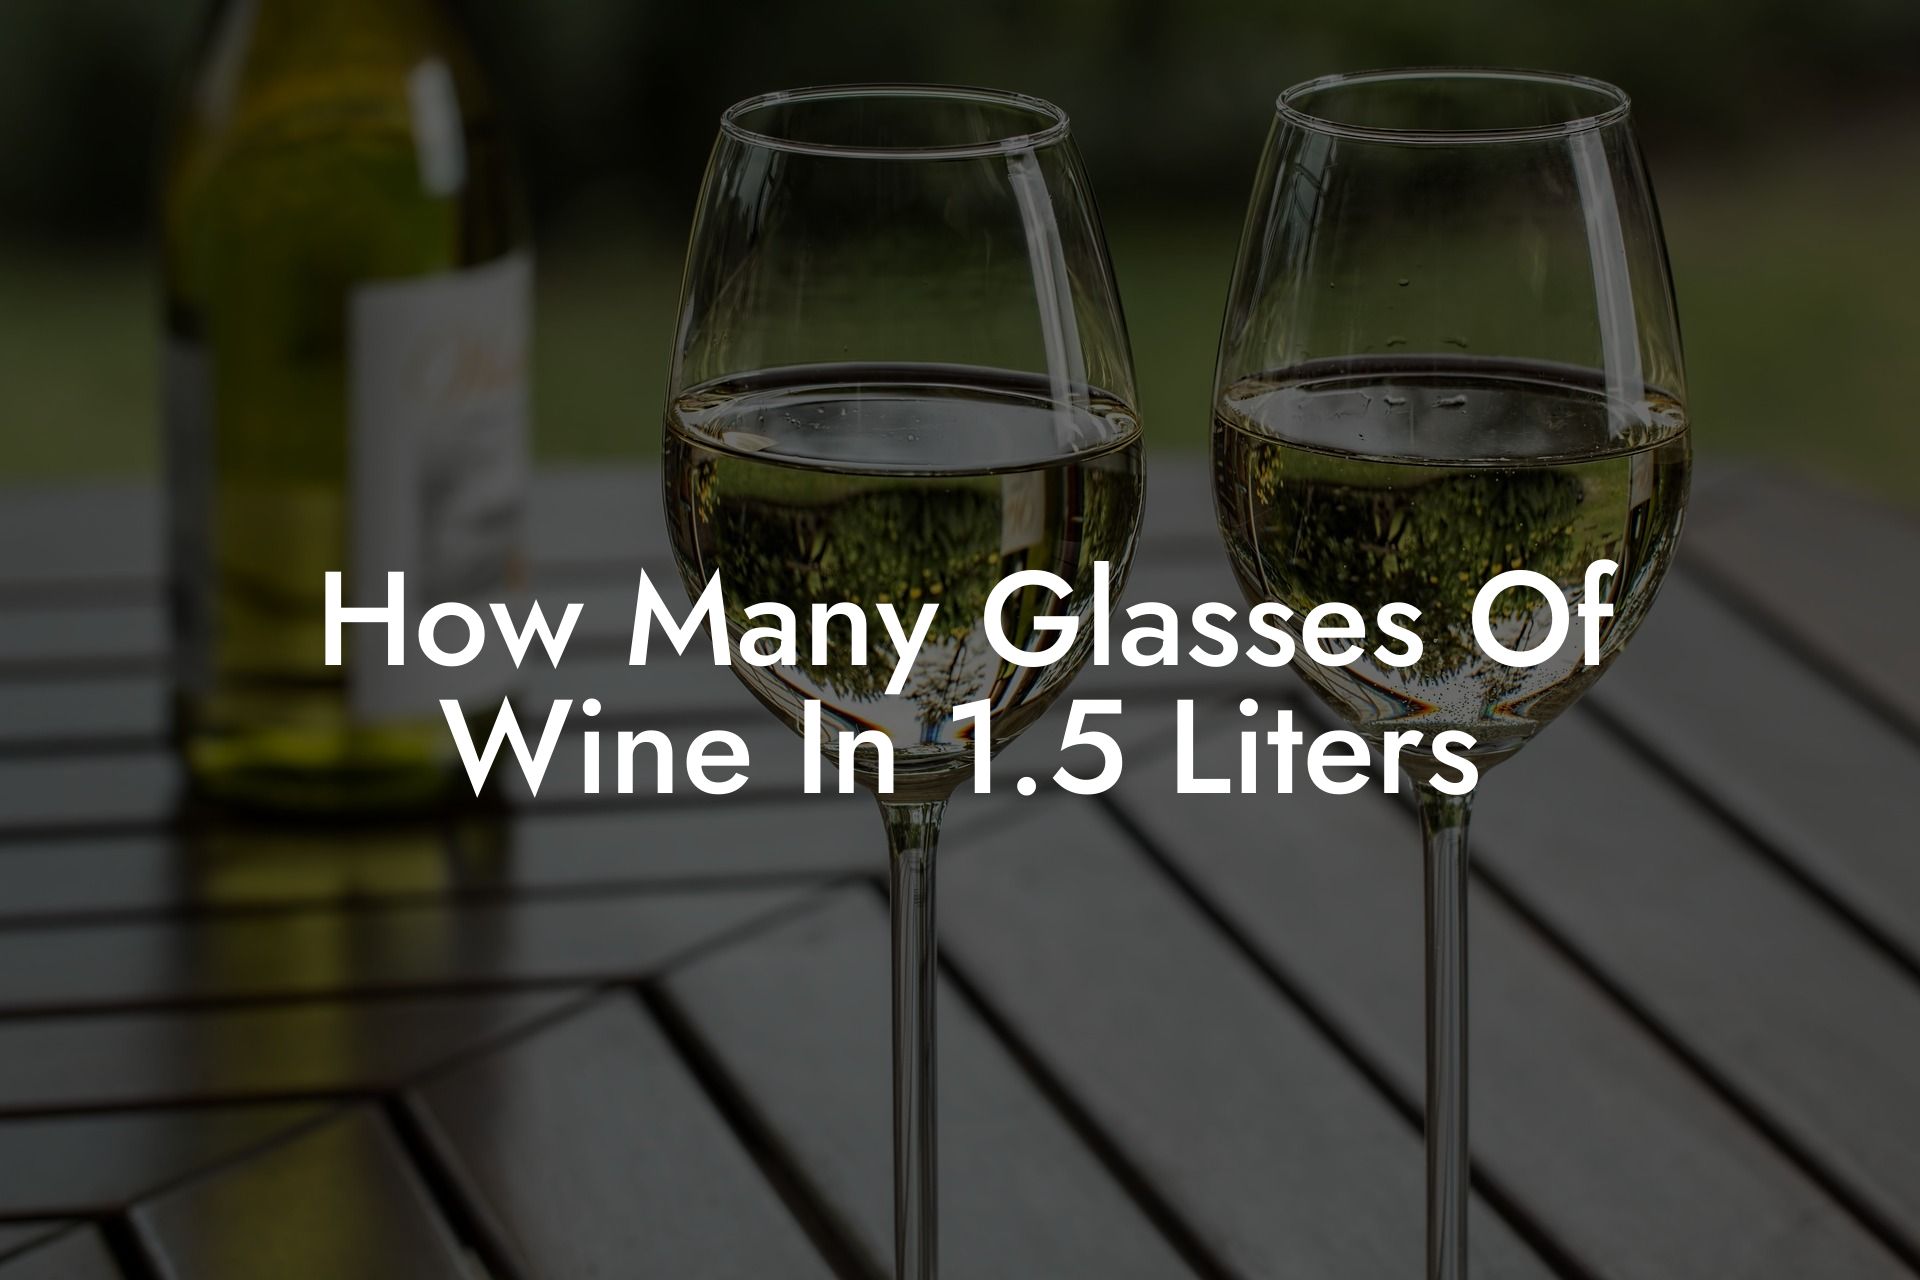 How Many Glasses Of Wine In 1.5 Liters